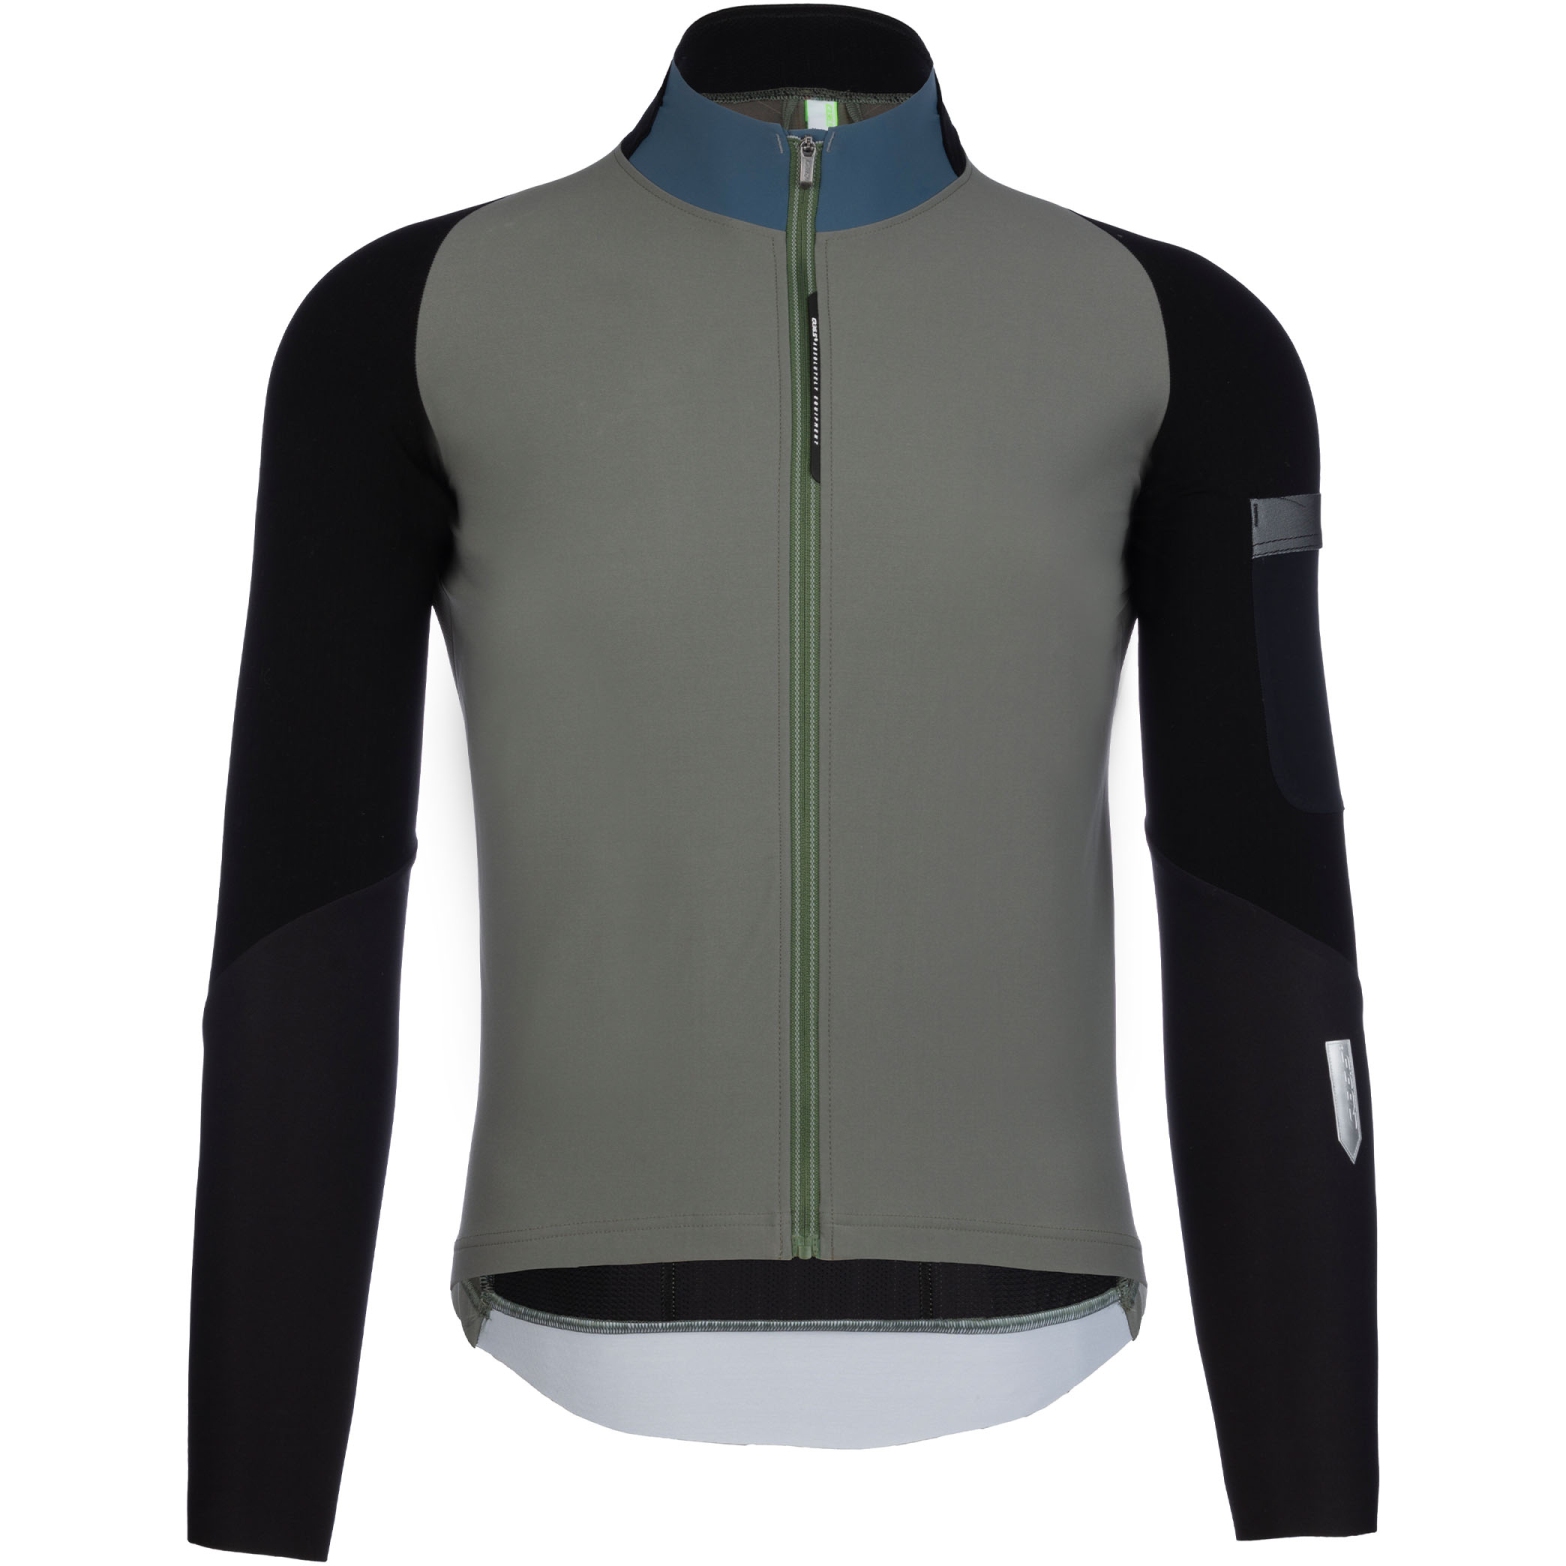 Picture of Q36.5 Hybrid Que X Longsleeve Jersey - olive green